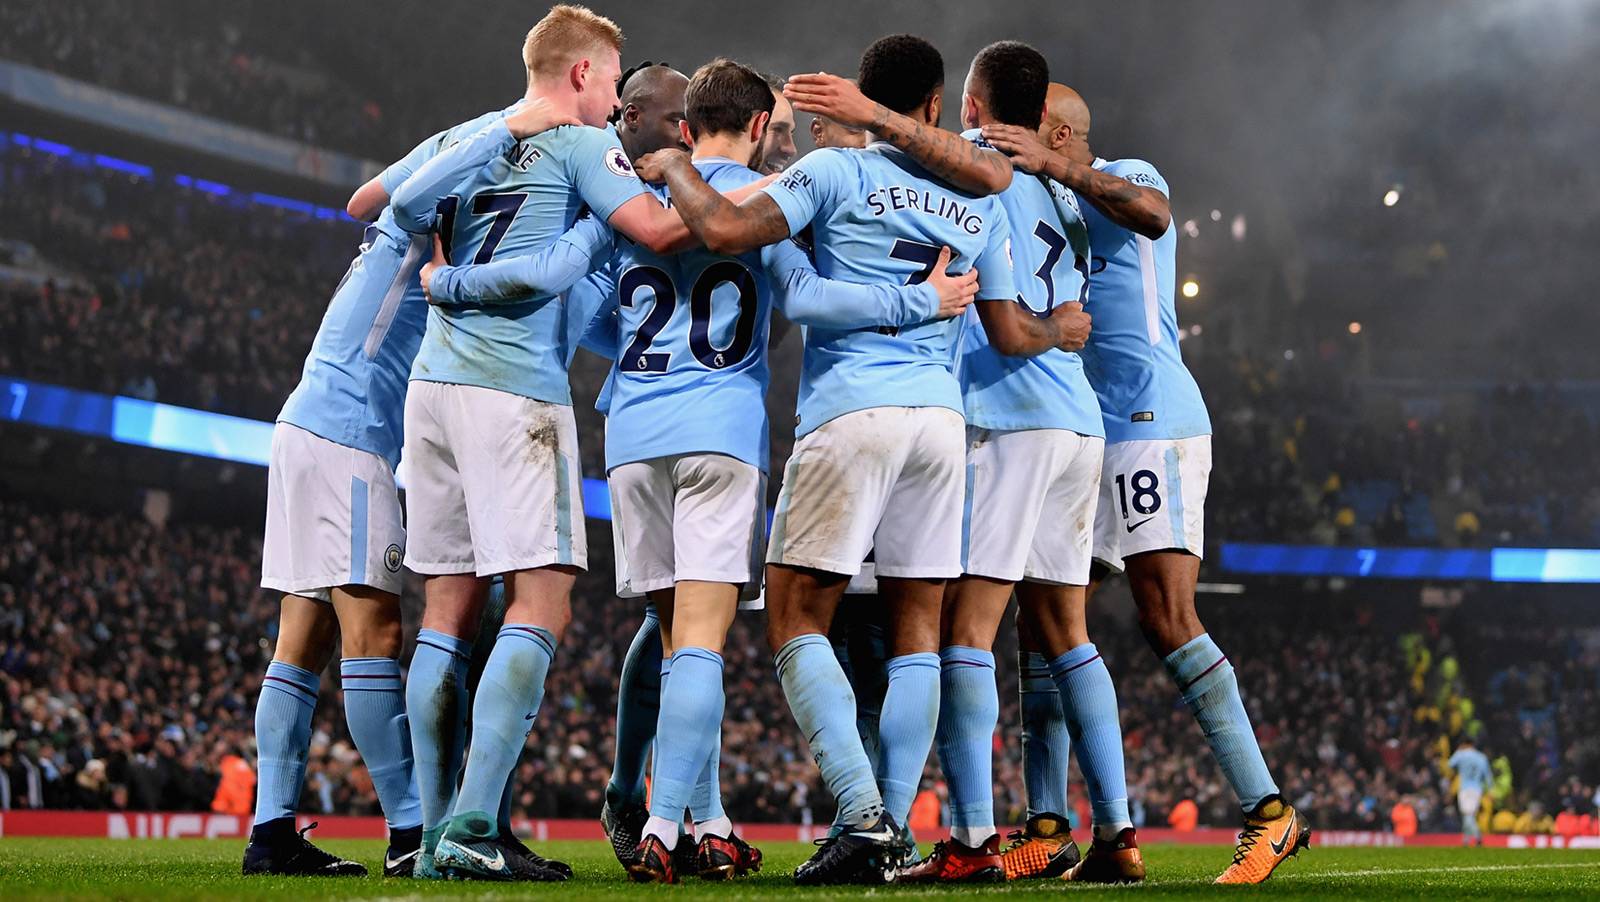 EPL review week 18: 16 wins for City; Newcastle hit bottom three